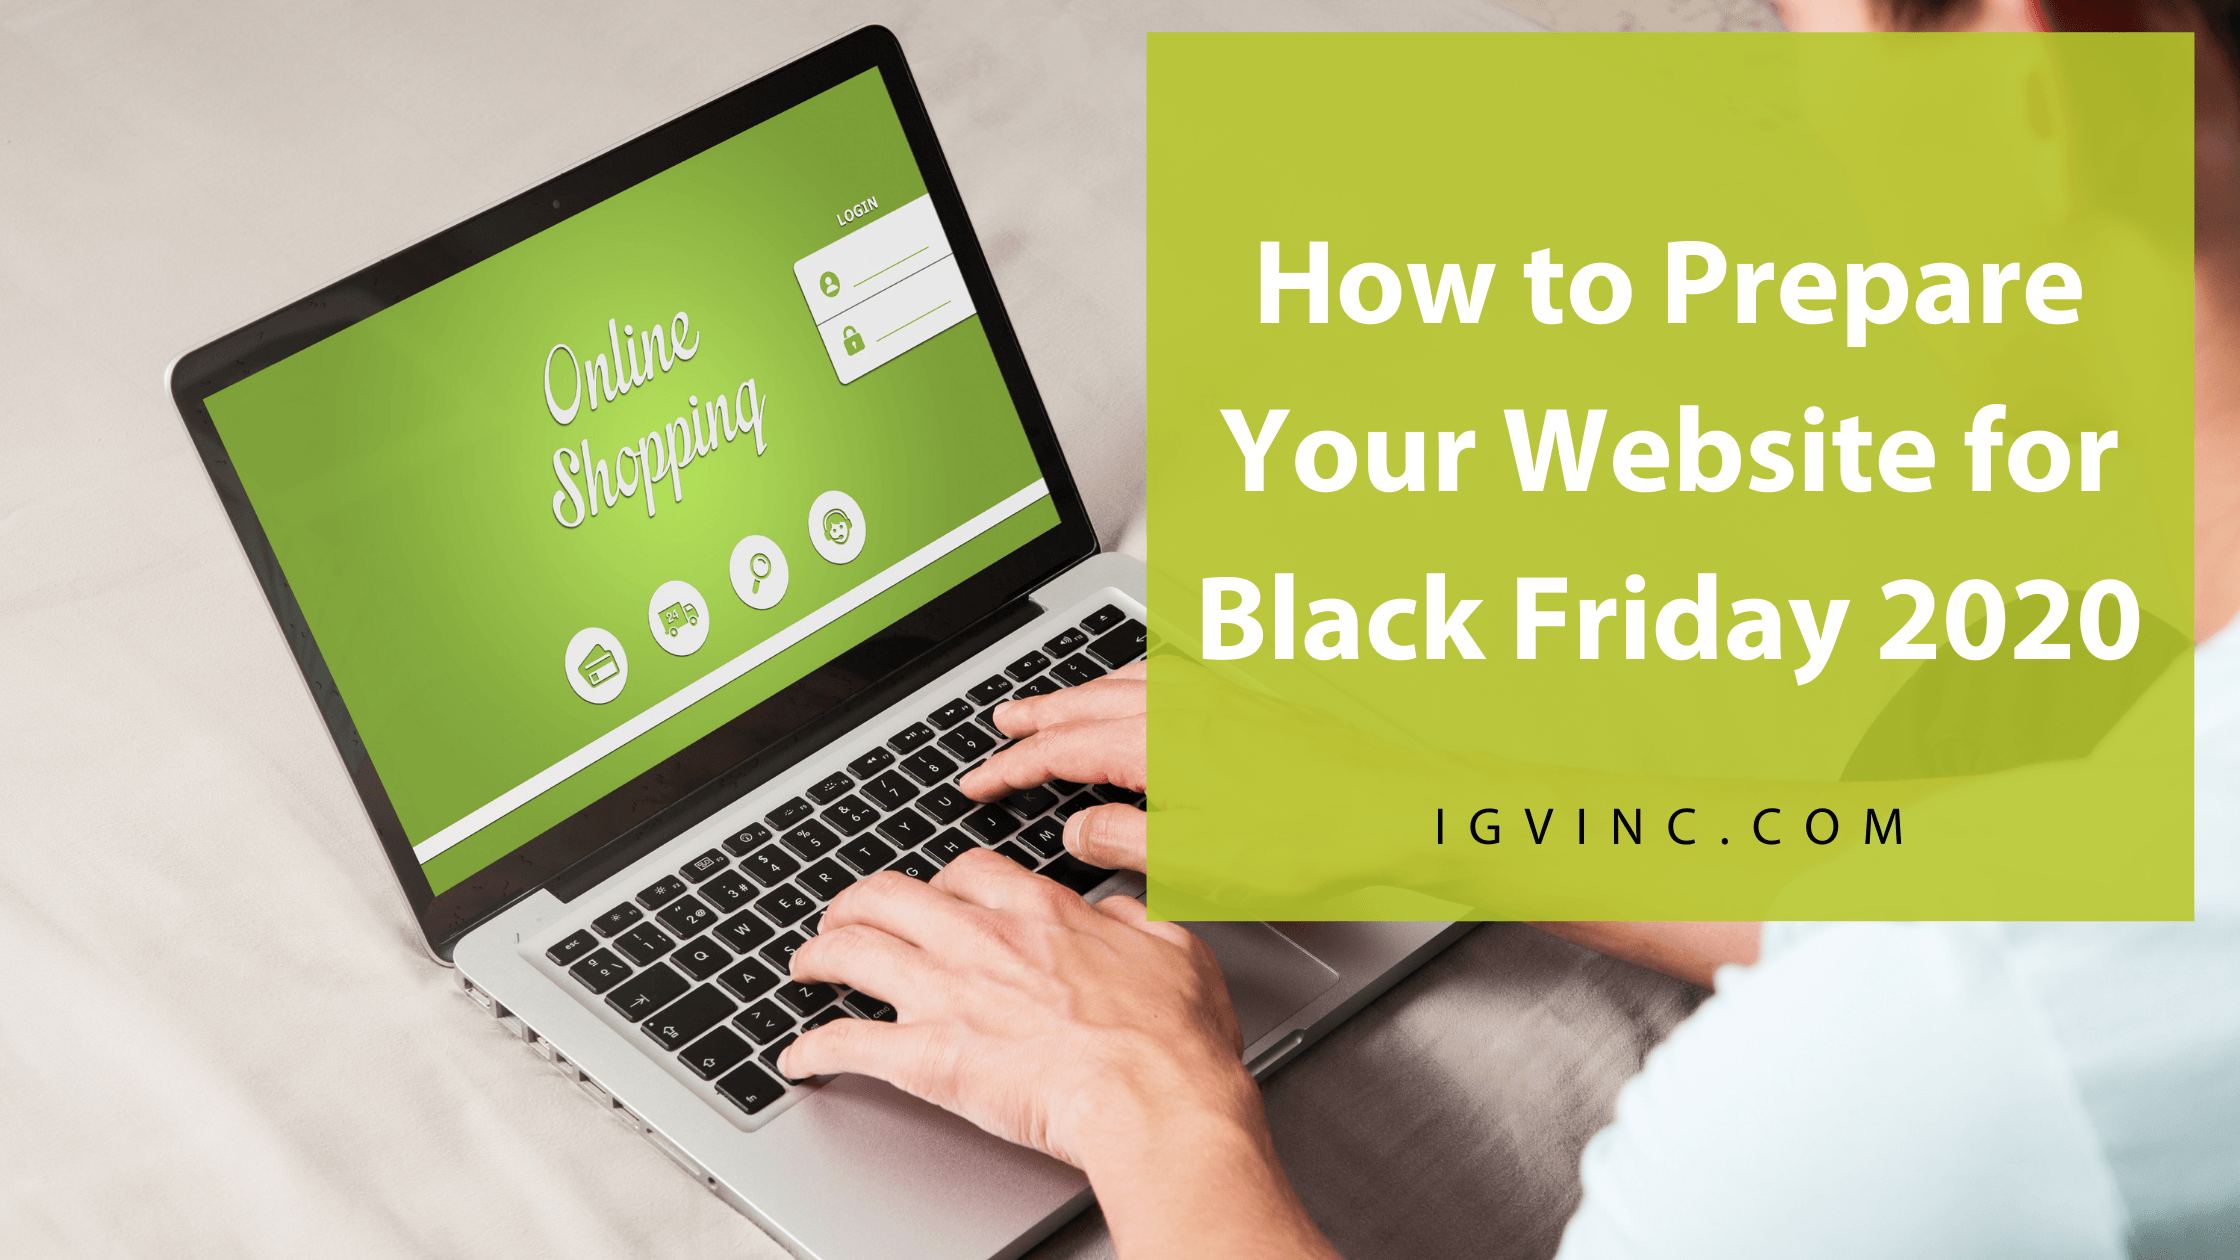 Website Checklist for Black Friday / Cyber Monday Shopping